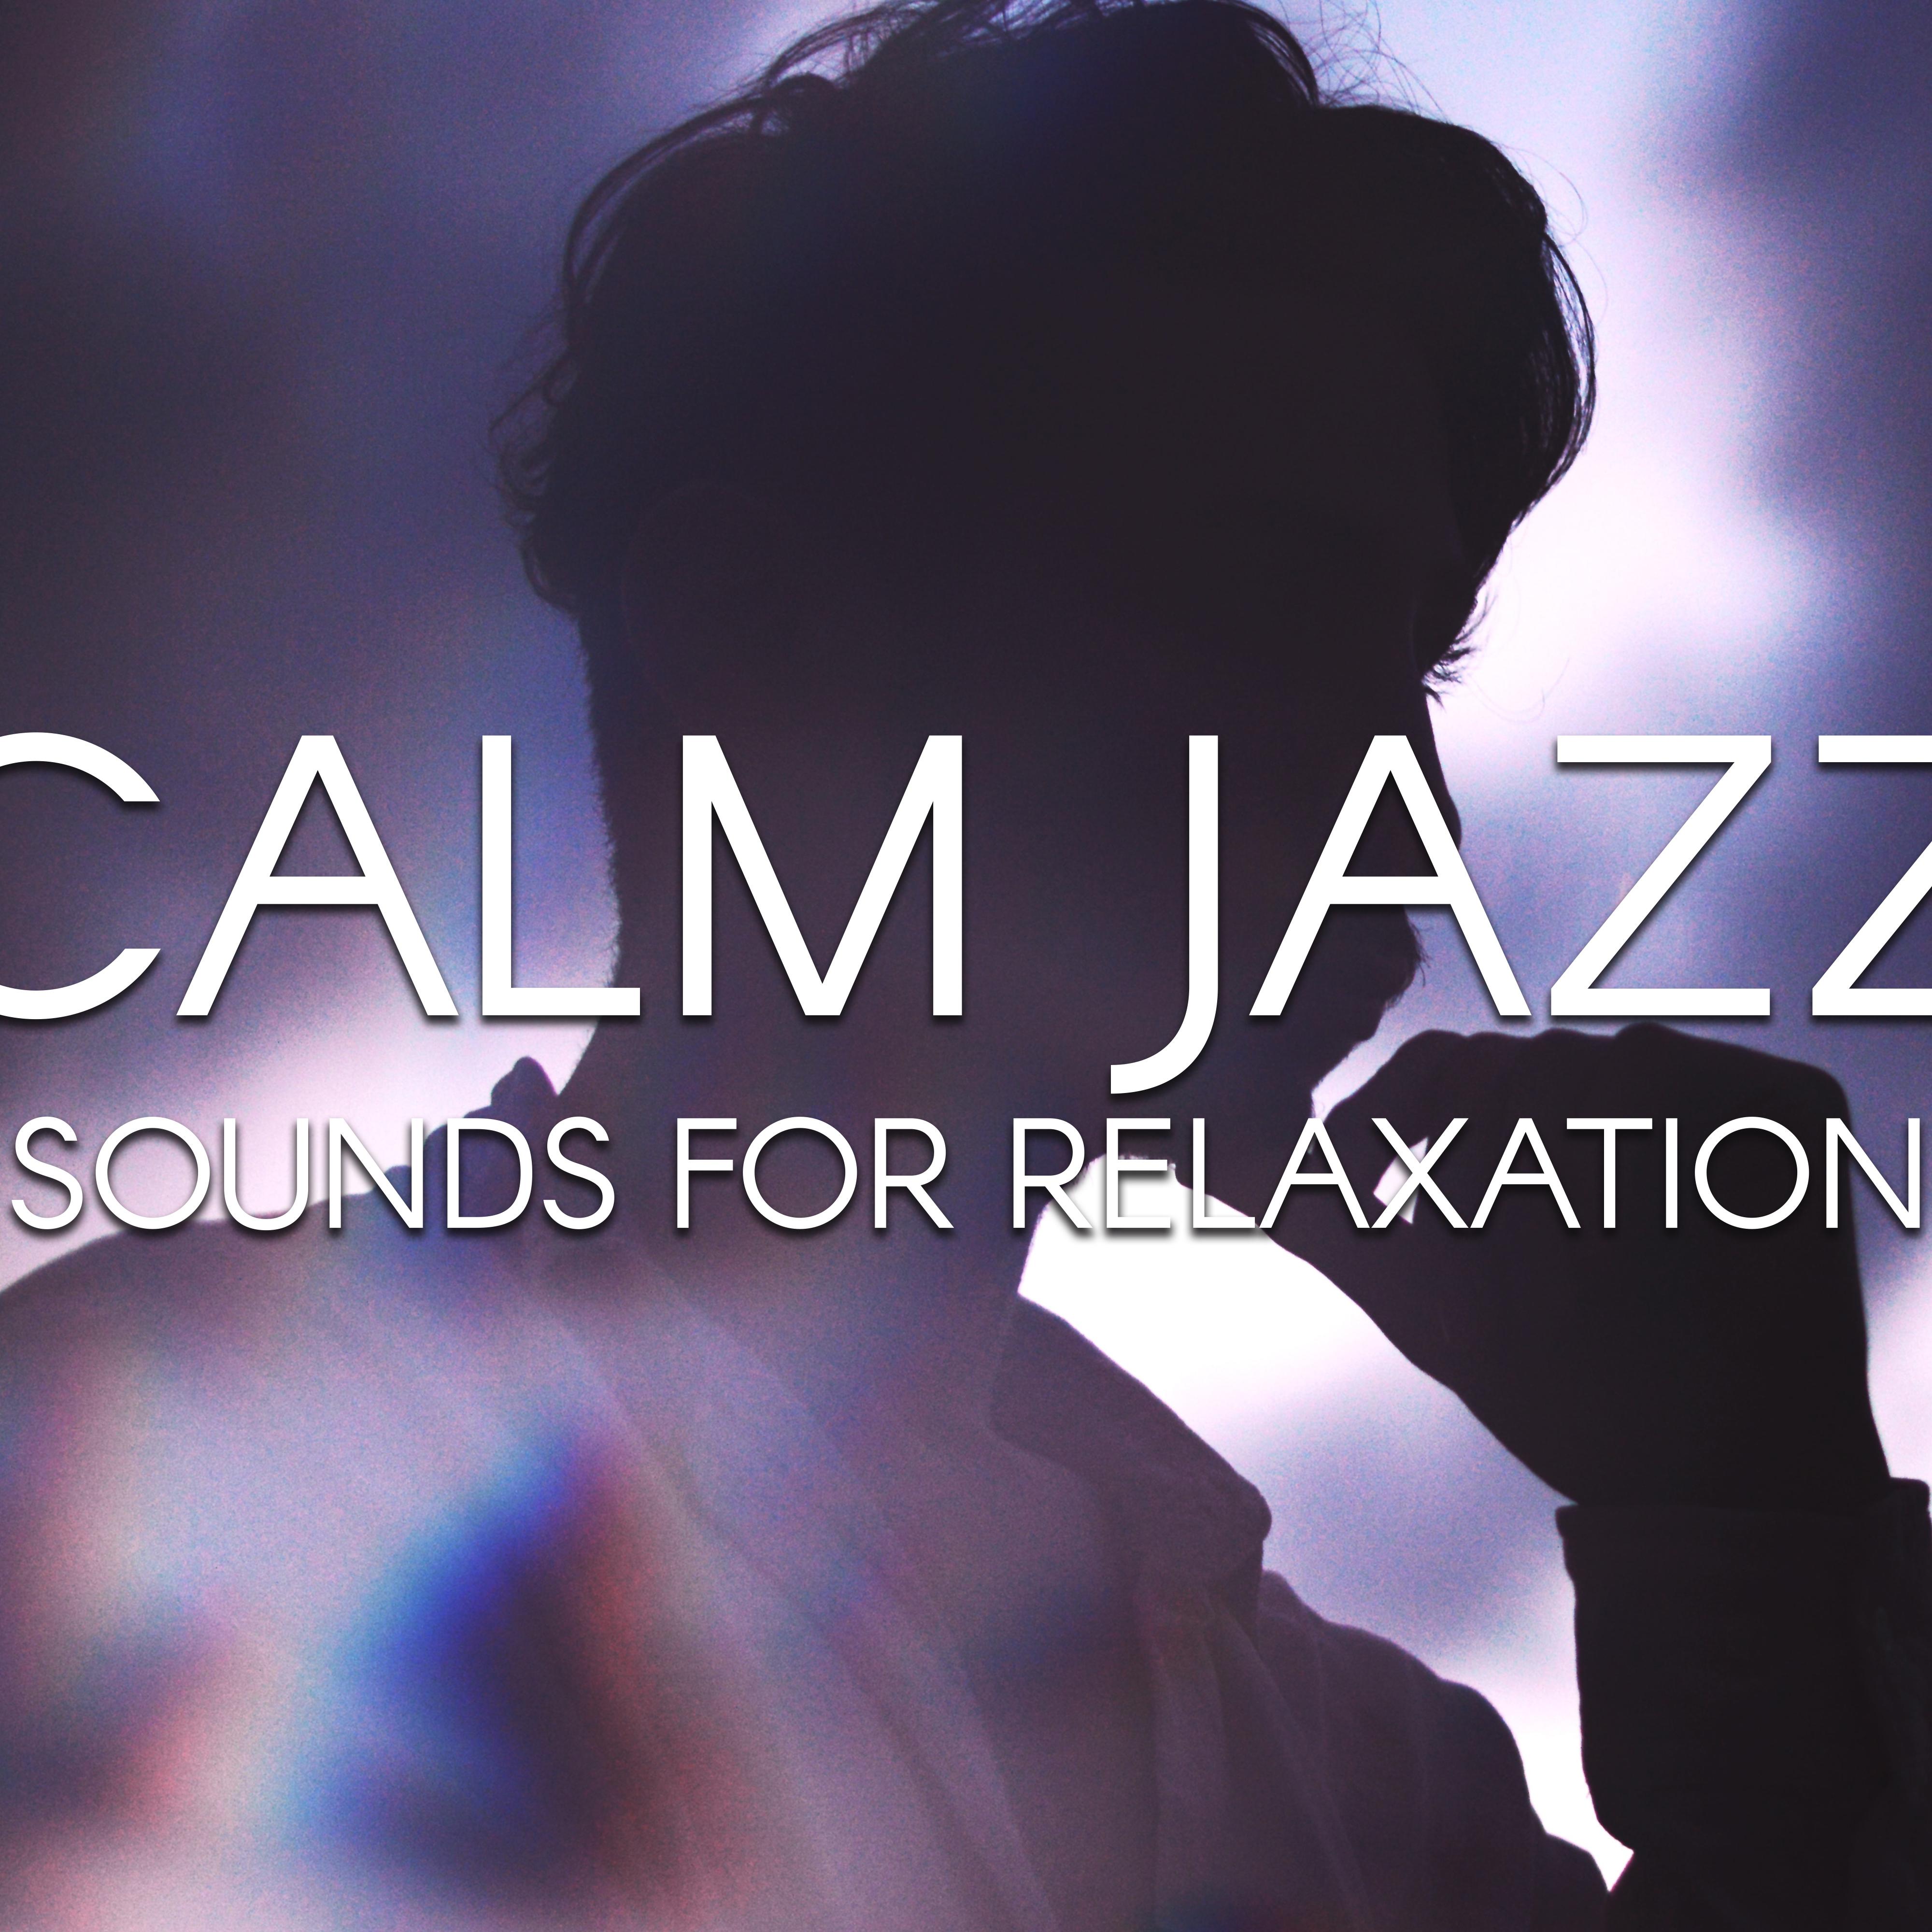 Calm Jazz Sounds for Relaxation